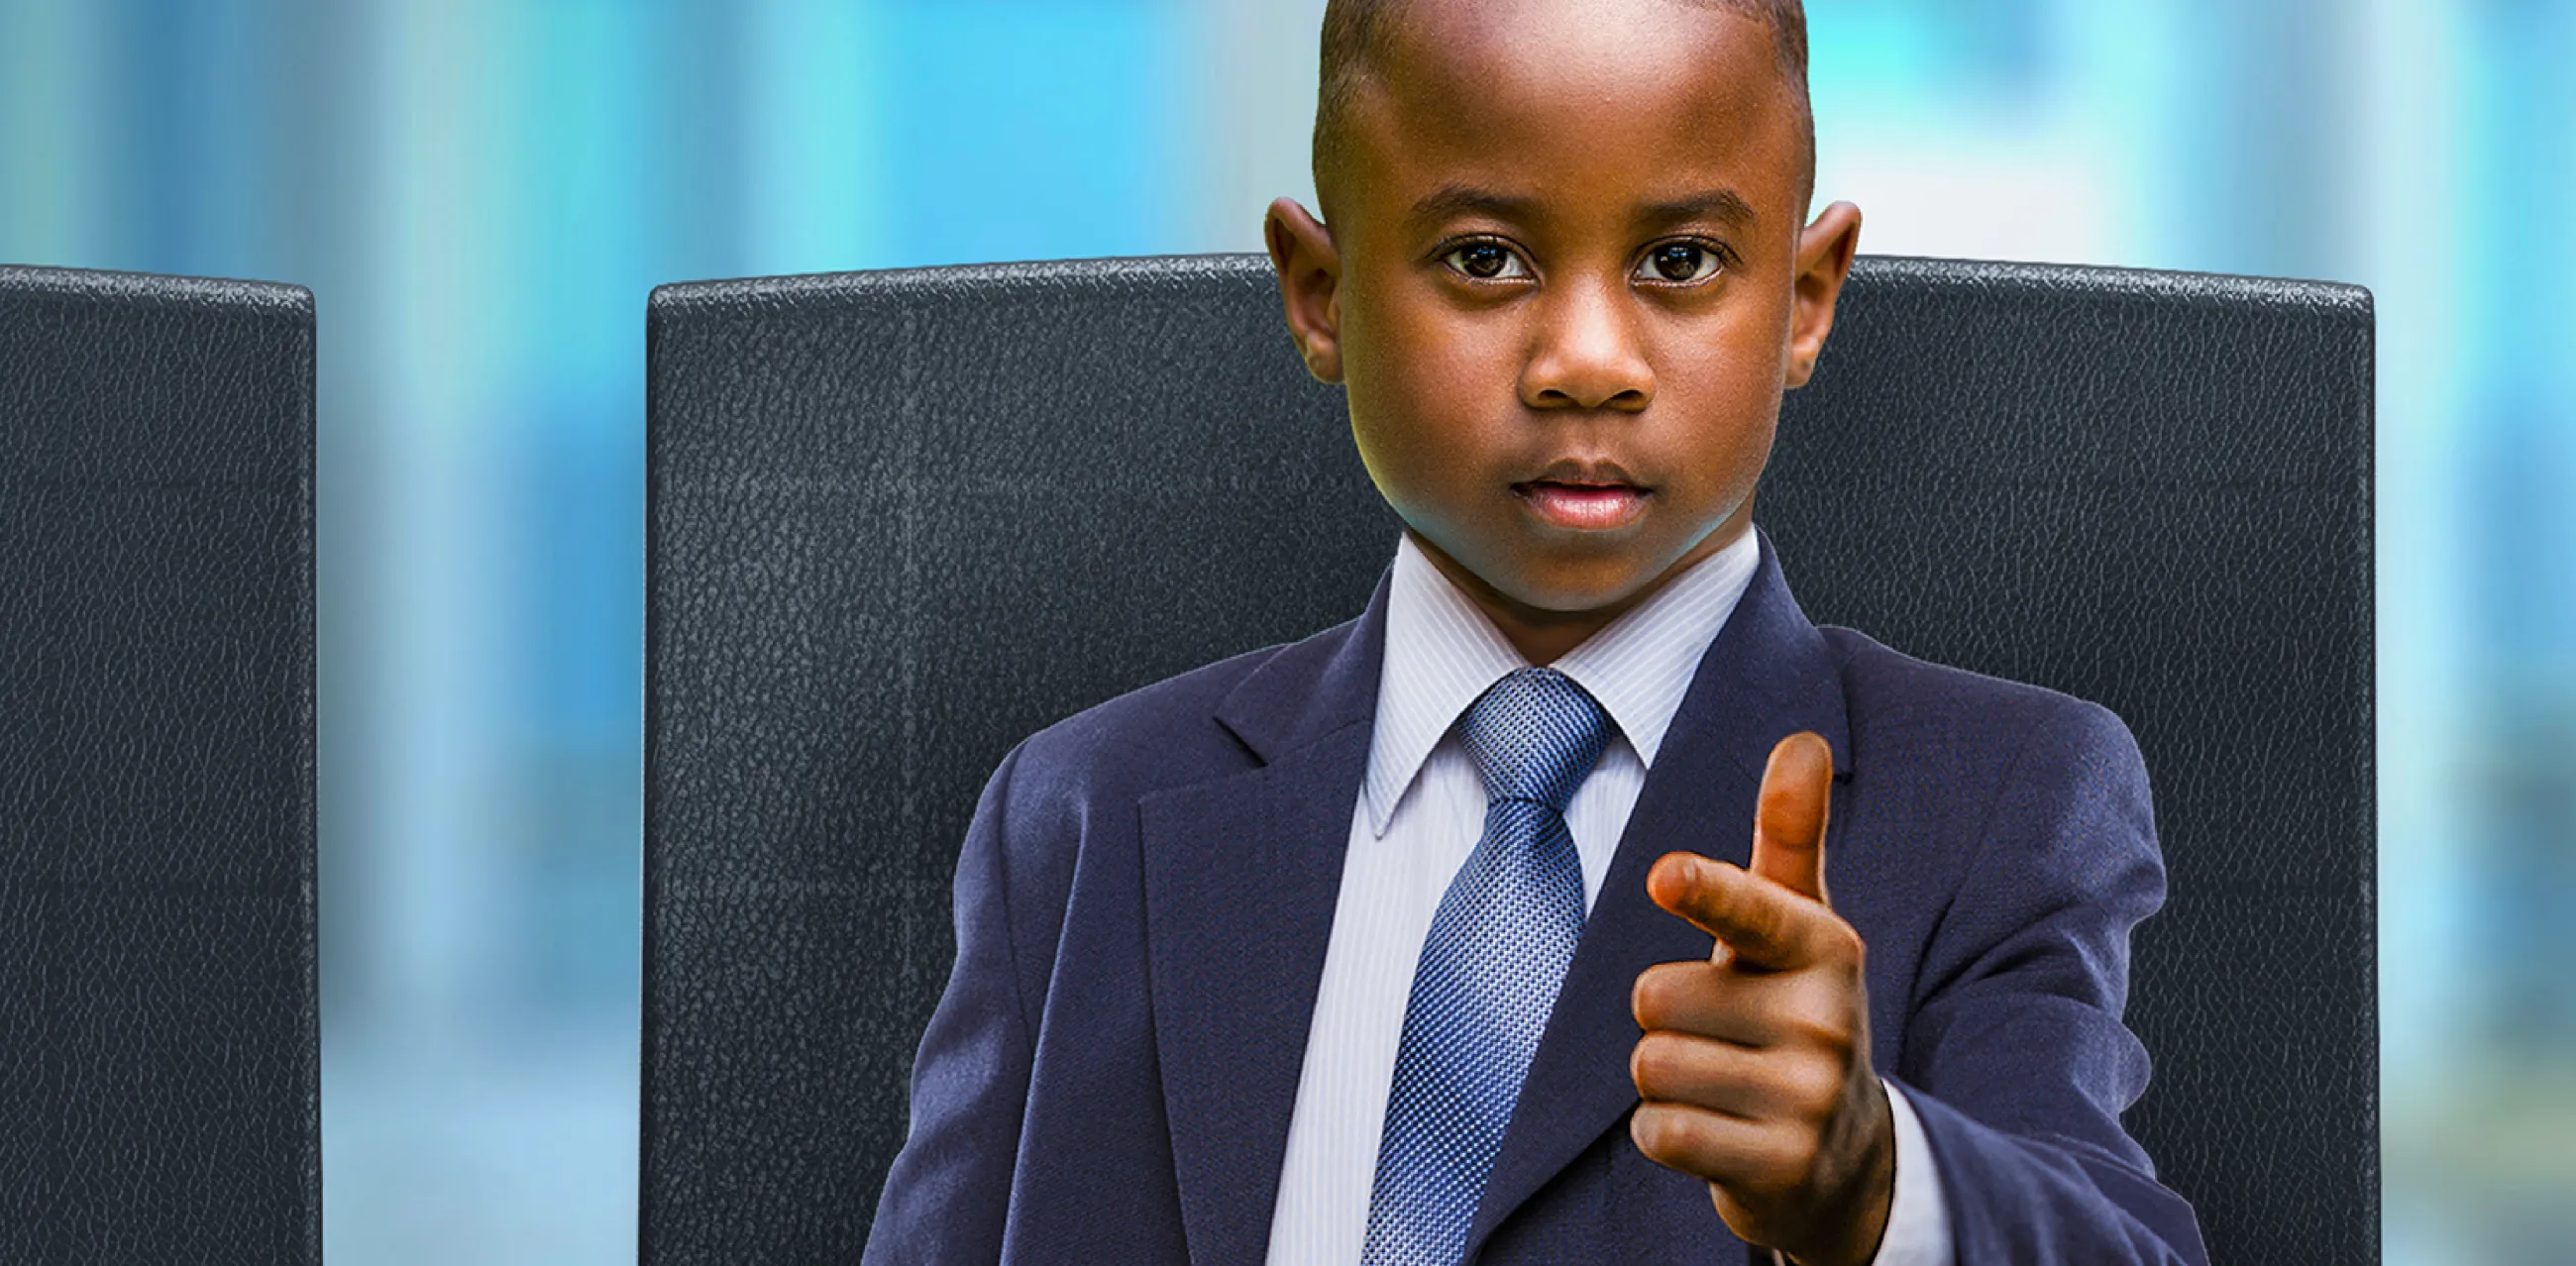 Teach First "Challenge the Impossible" campaign visuals showing a young boy dressed as an entrepreneur in a business suit, pointing at the viewer. 